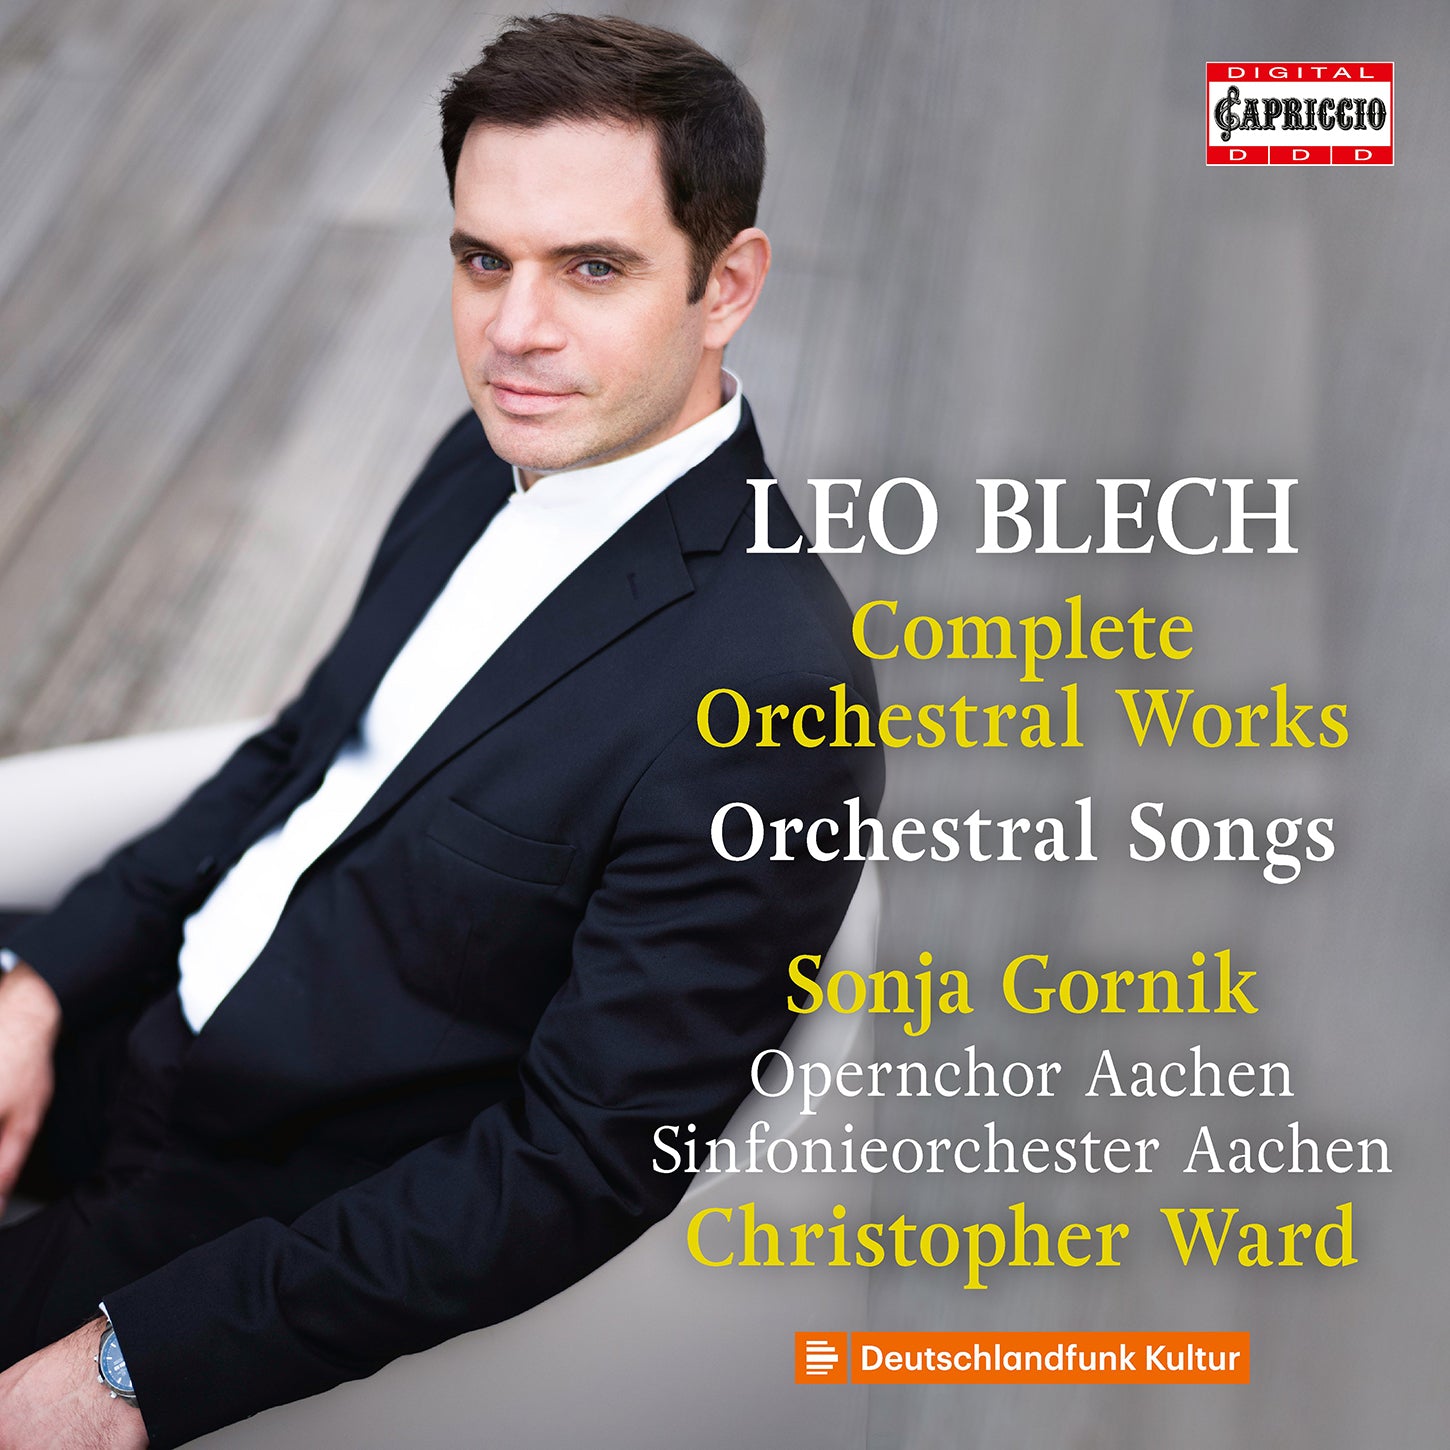 Blech: Complete Orchestral Works & Songs / Gornik, Ward, Aachen Symphony Orchestra